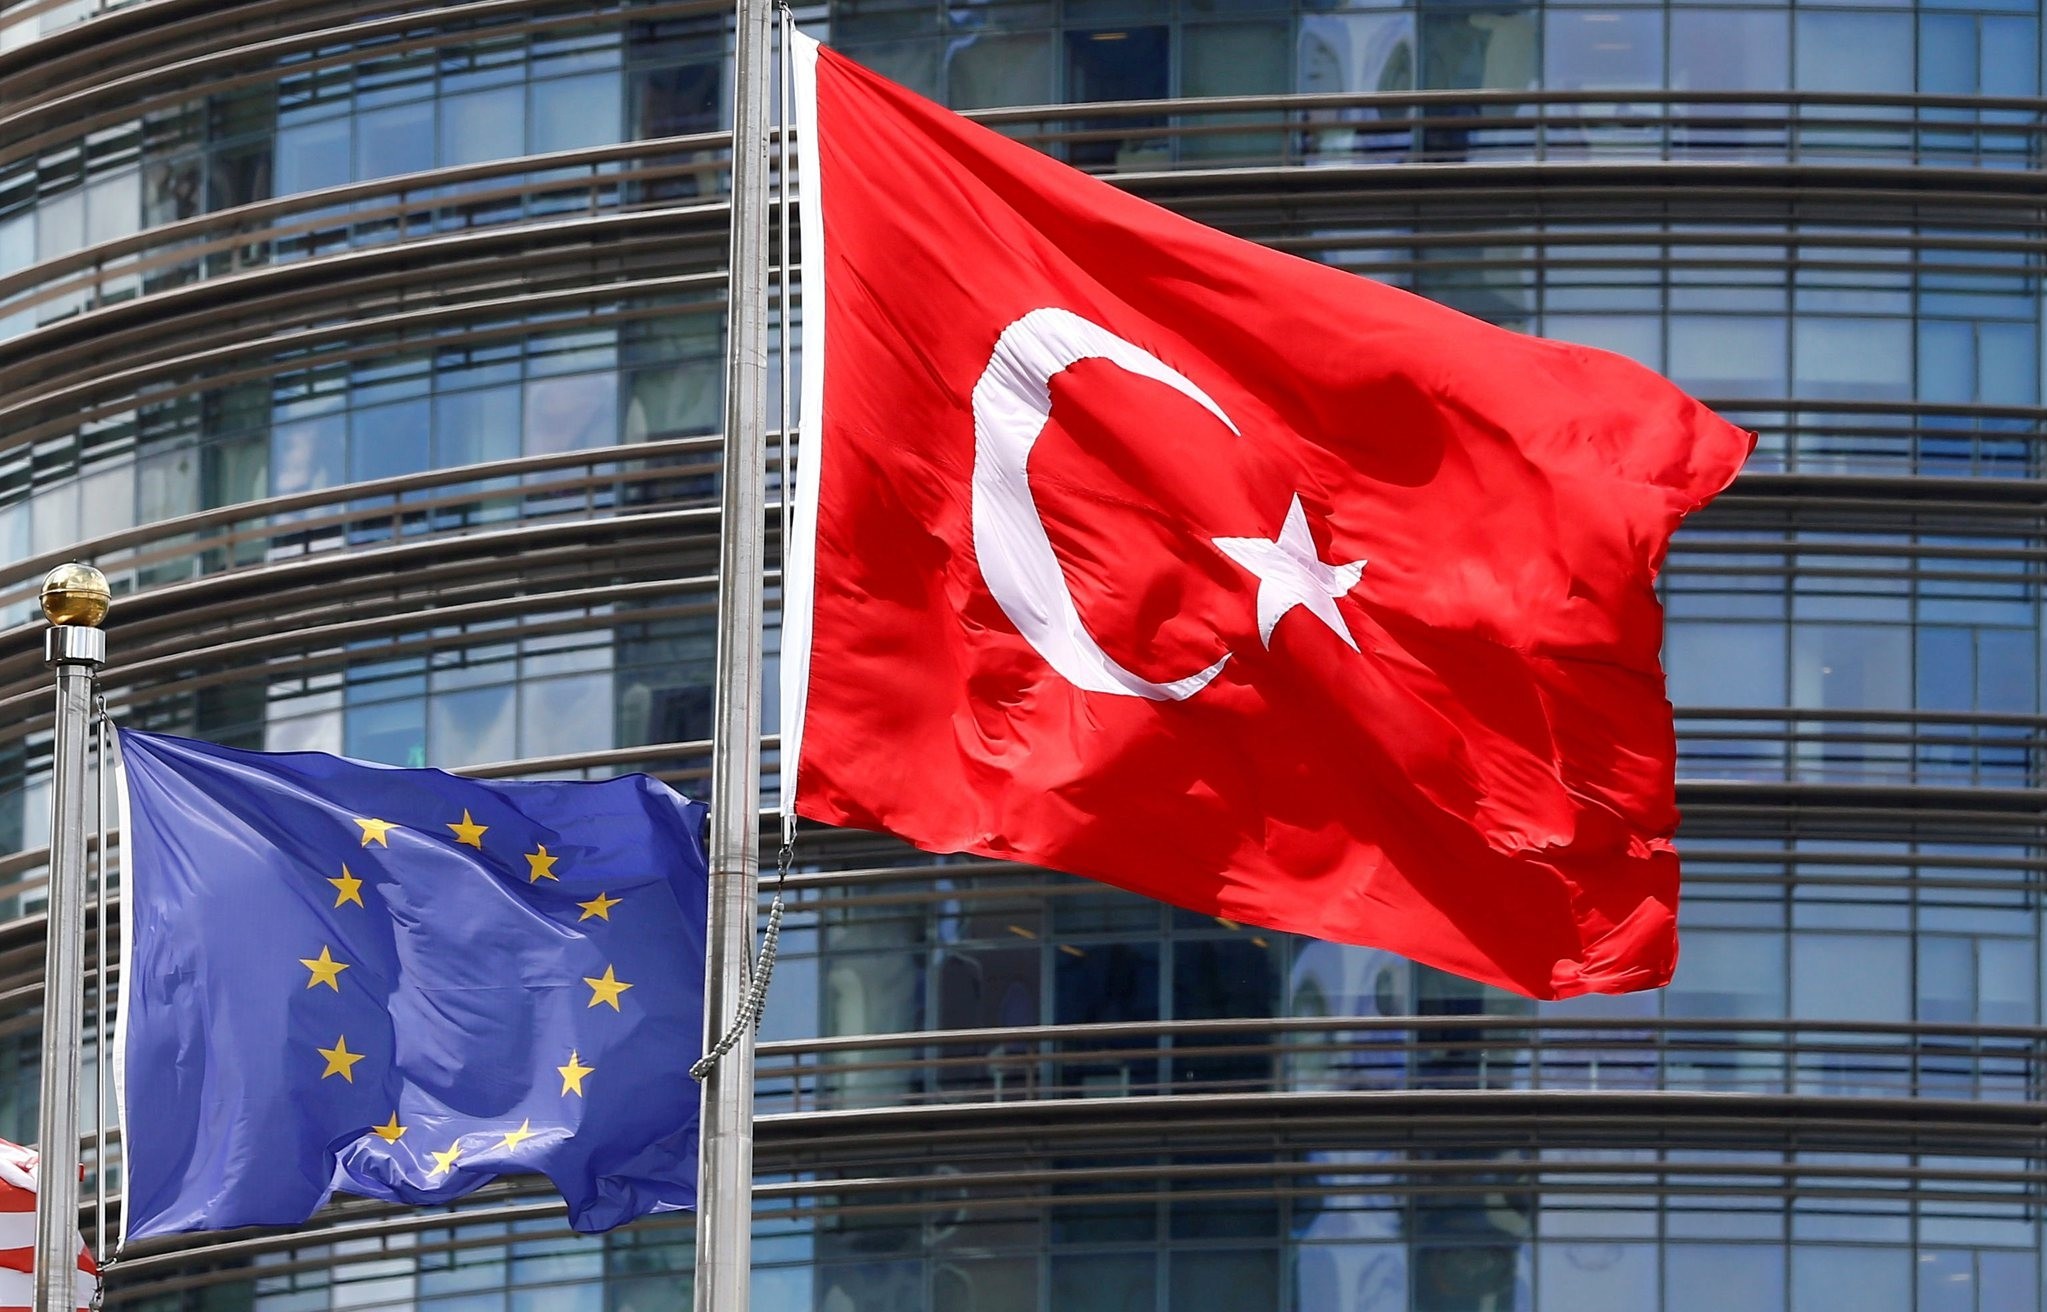 As tensions in bilateral ties have calmed after elections in some European countries passed, Turkey and the EU are scheduled to hold a number of meetings on energy, transportation and trade partnerships in the weeks to come.